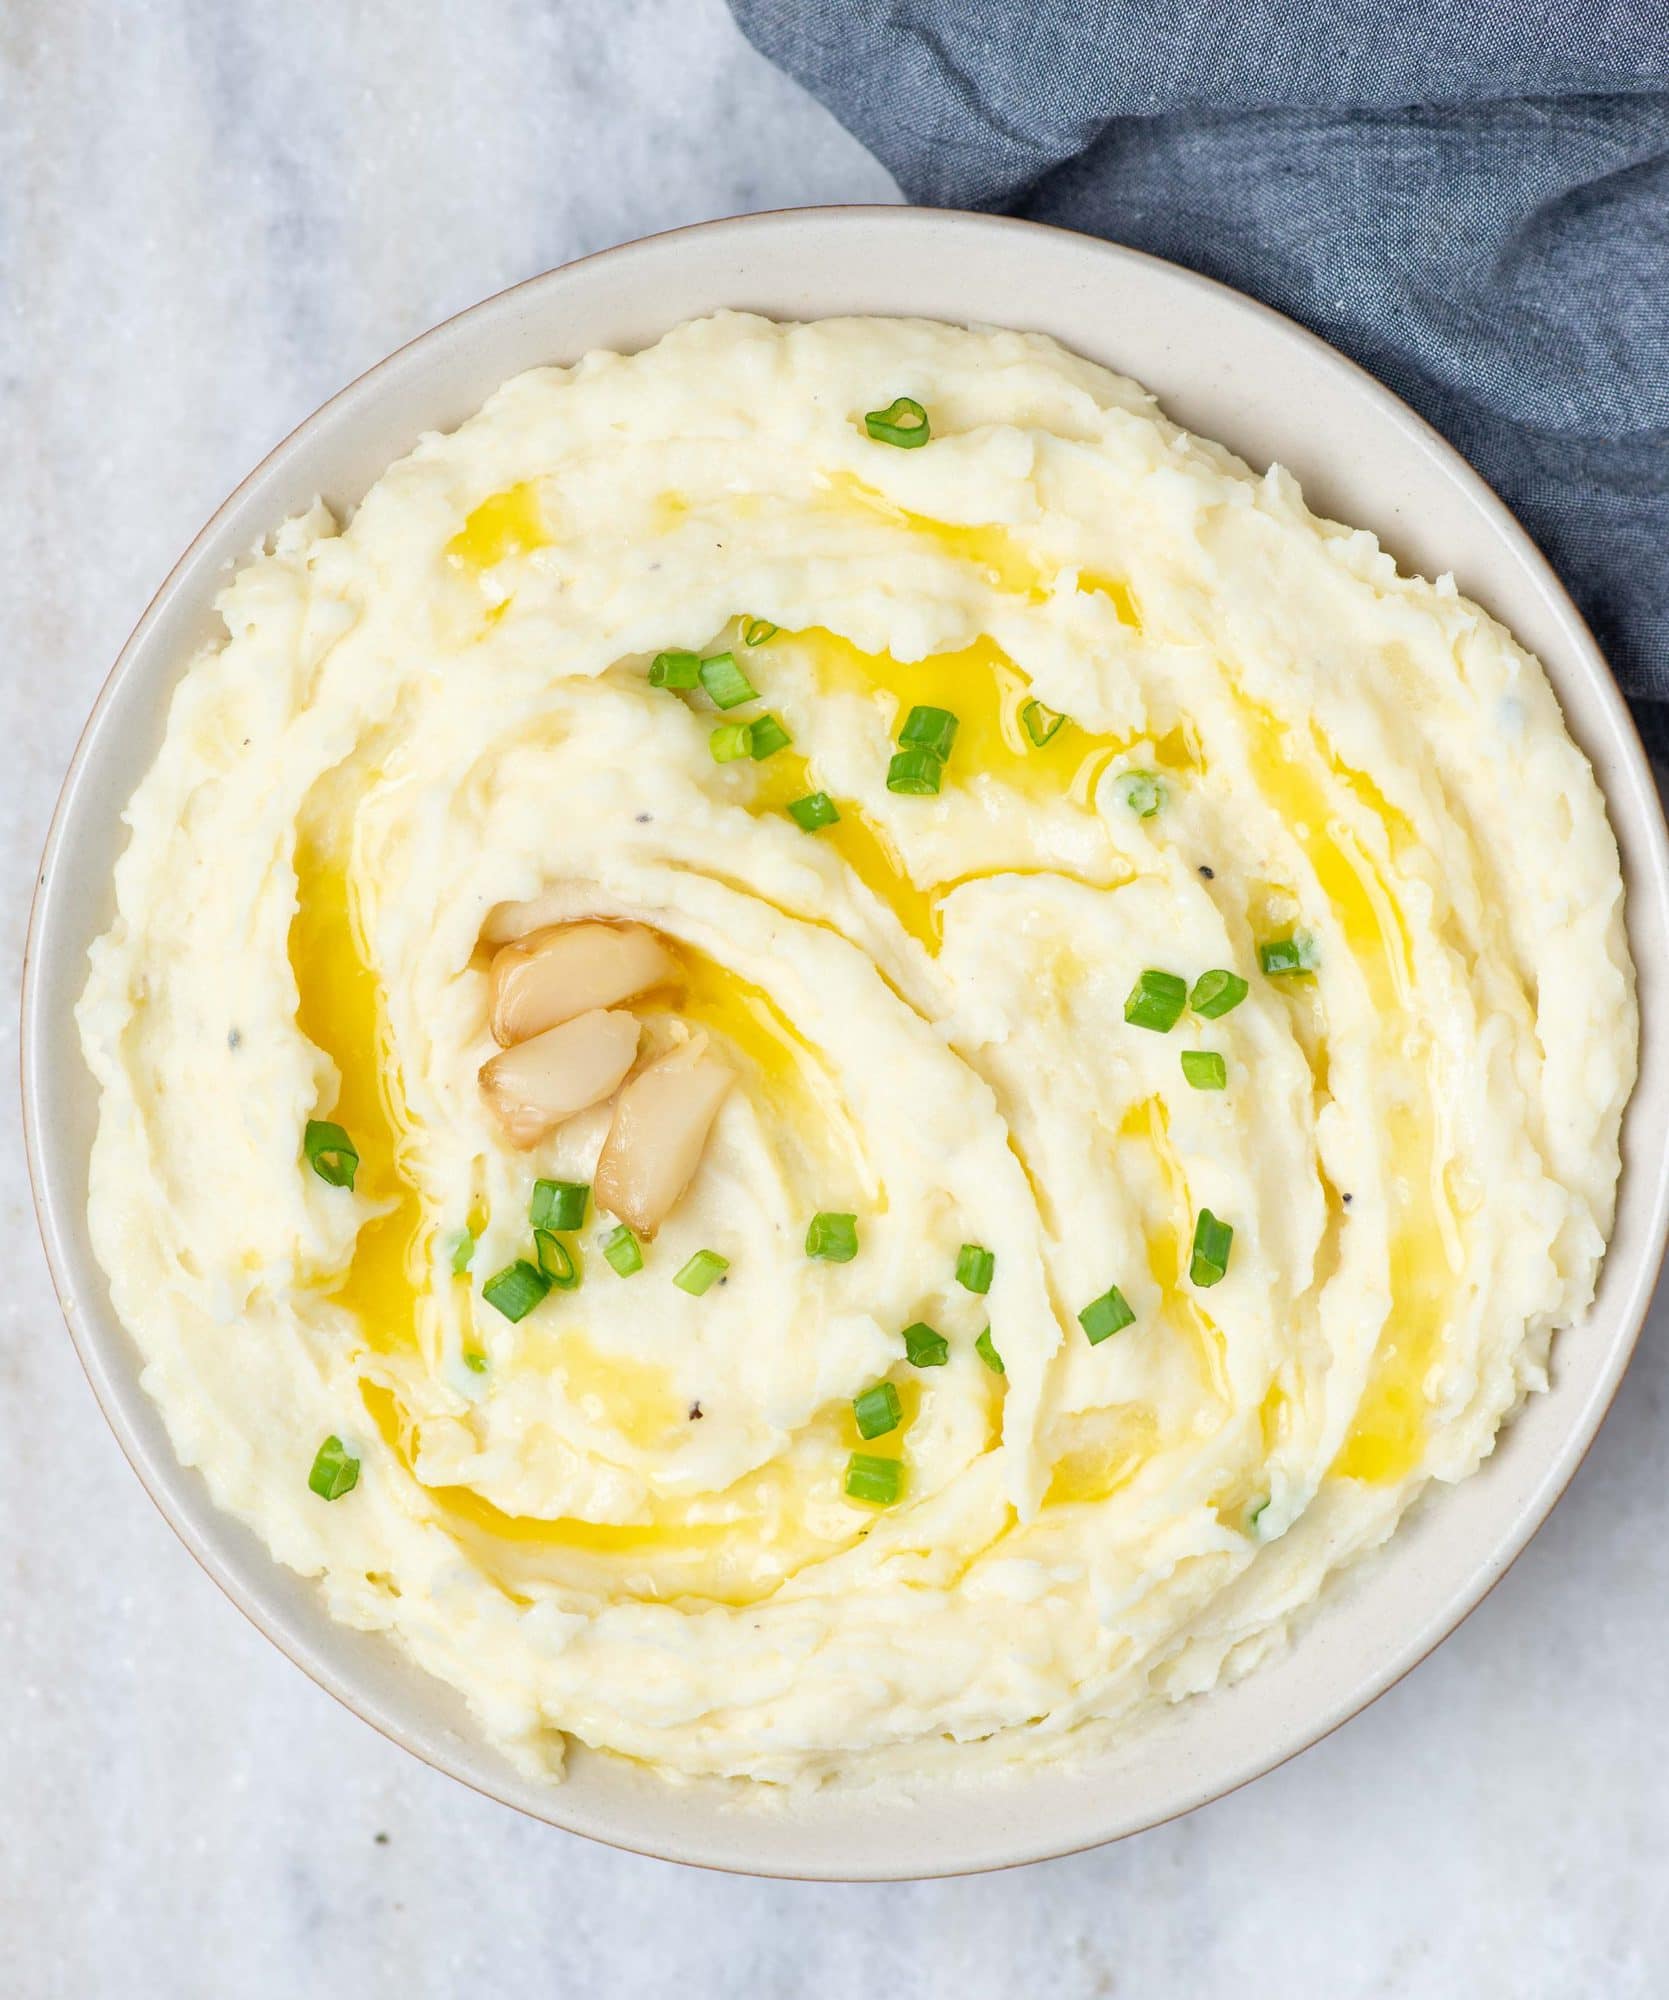 mashed potato elevates everyday mash with the flavor of roasted garlic to a divine side dish to any meat.